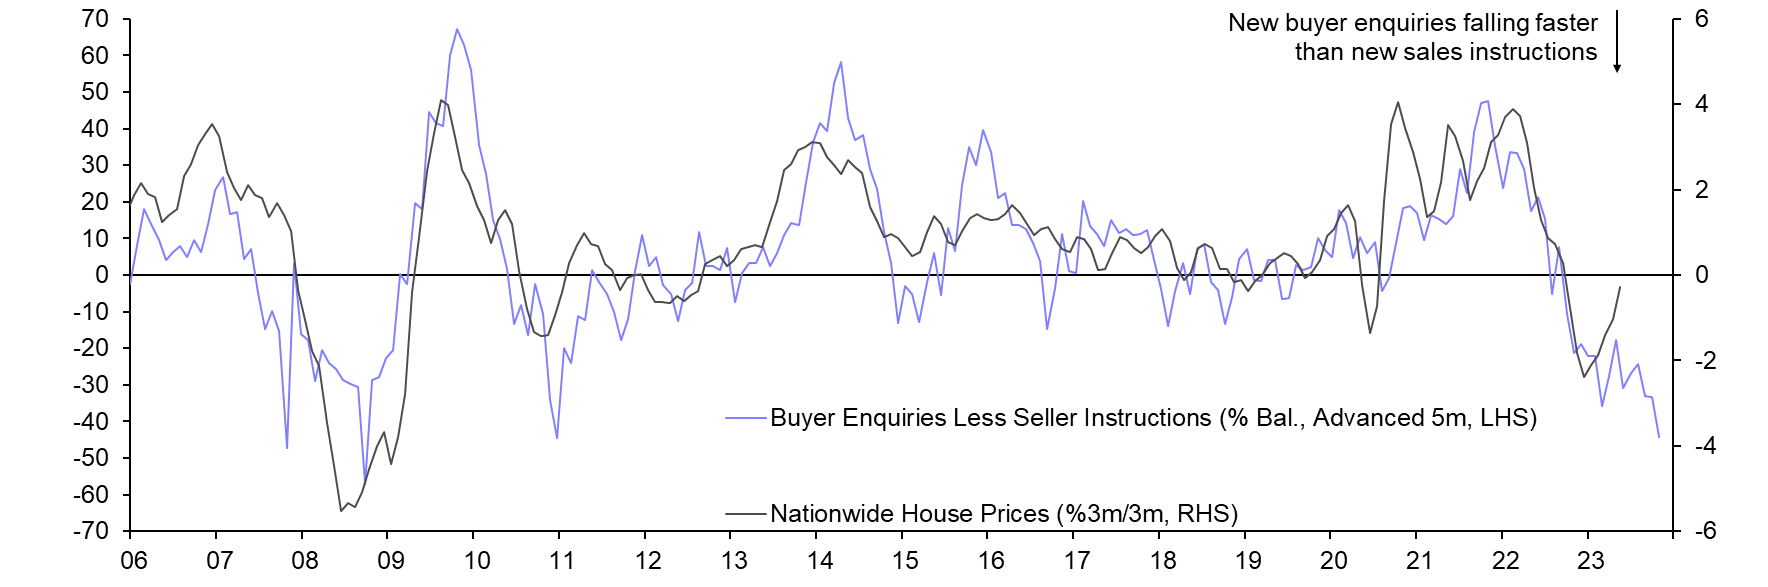 Nationwide House Prices (Jul.)
